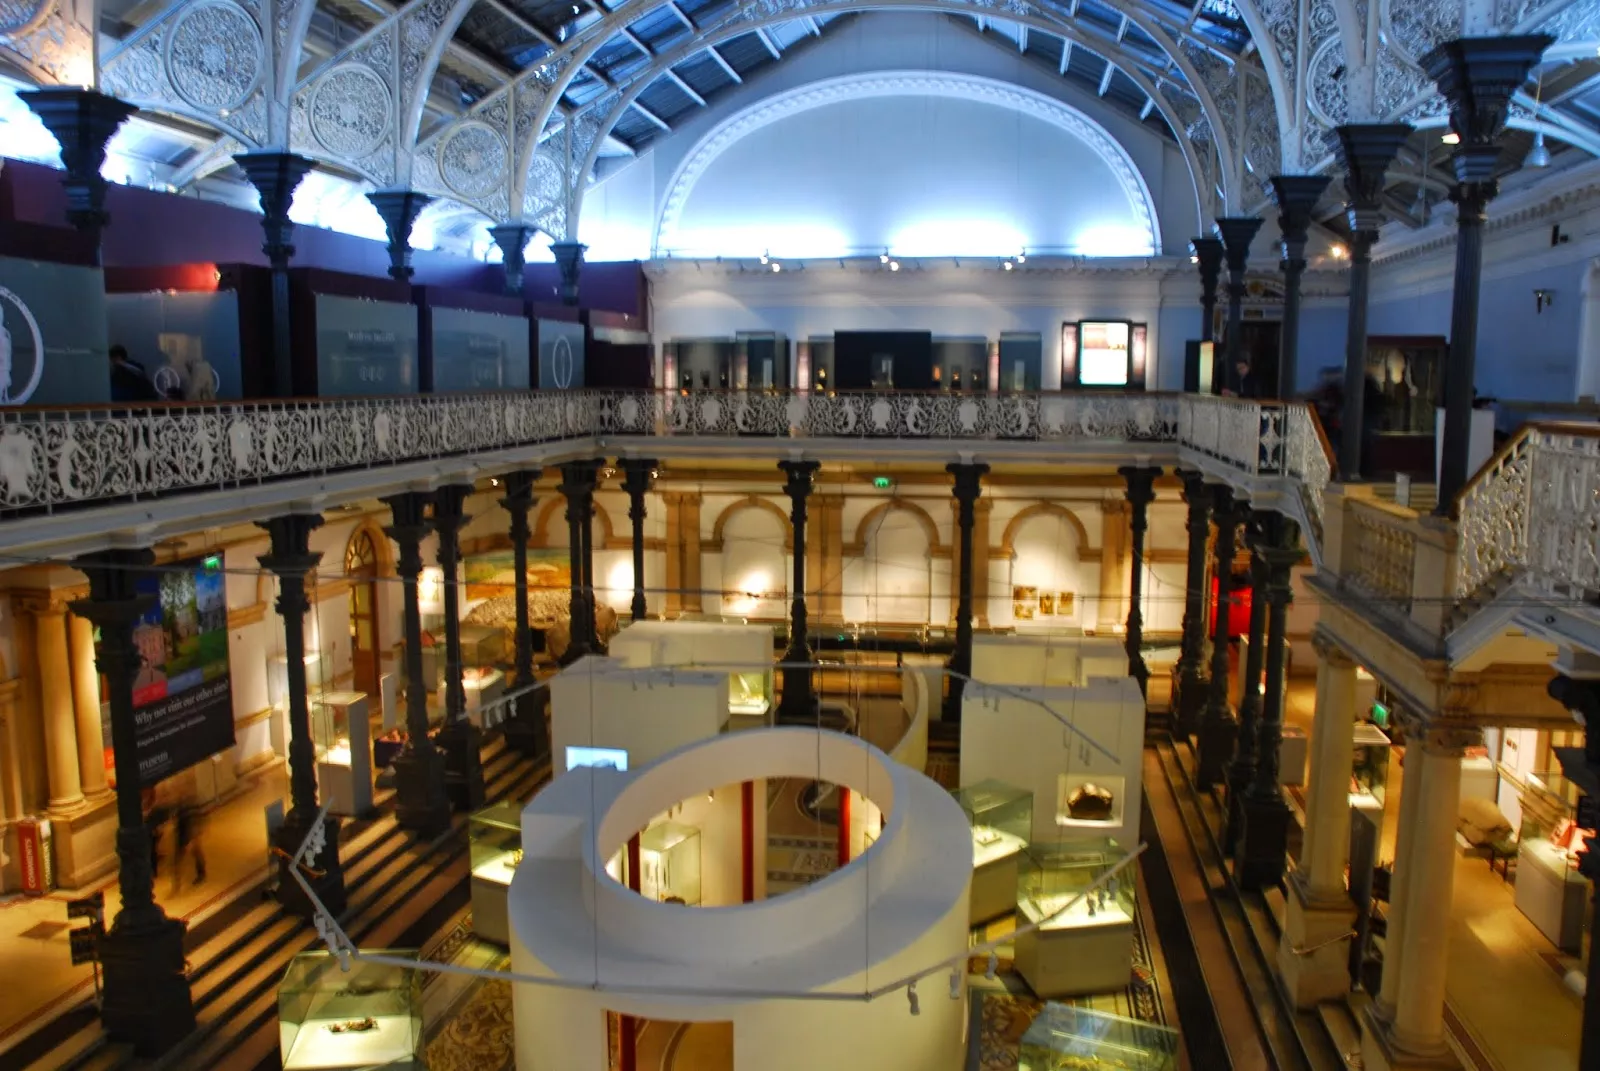 National Museum of Ireland – Archaeology in Ireland, Europe | Museums - Rated 3.8